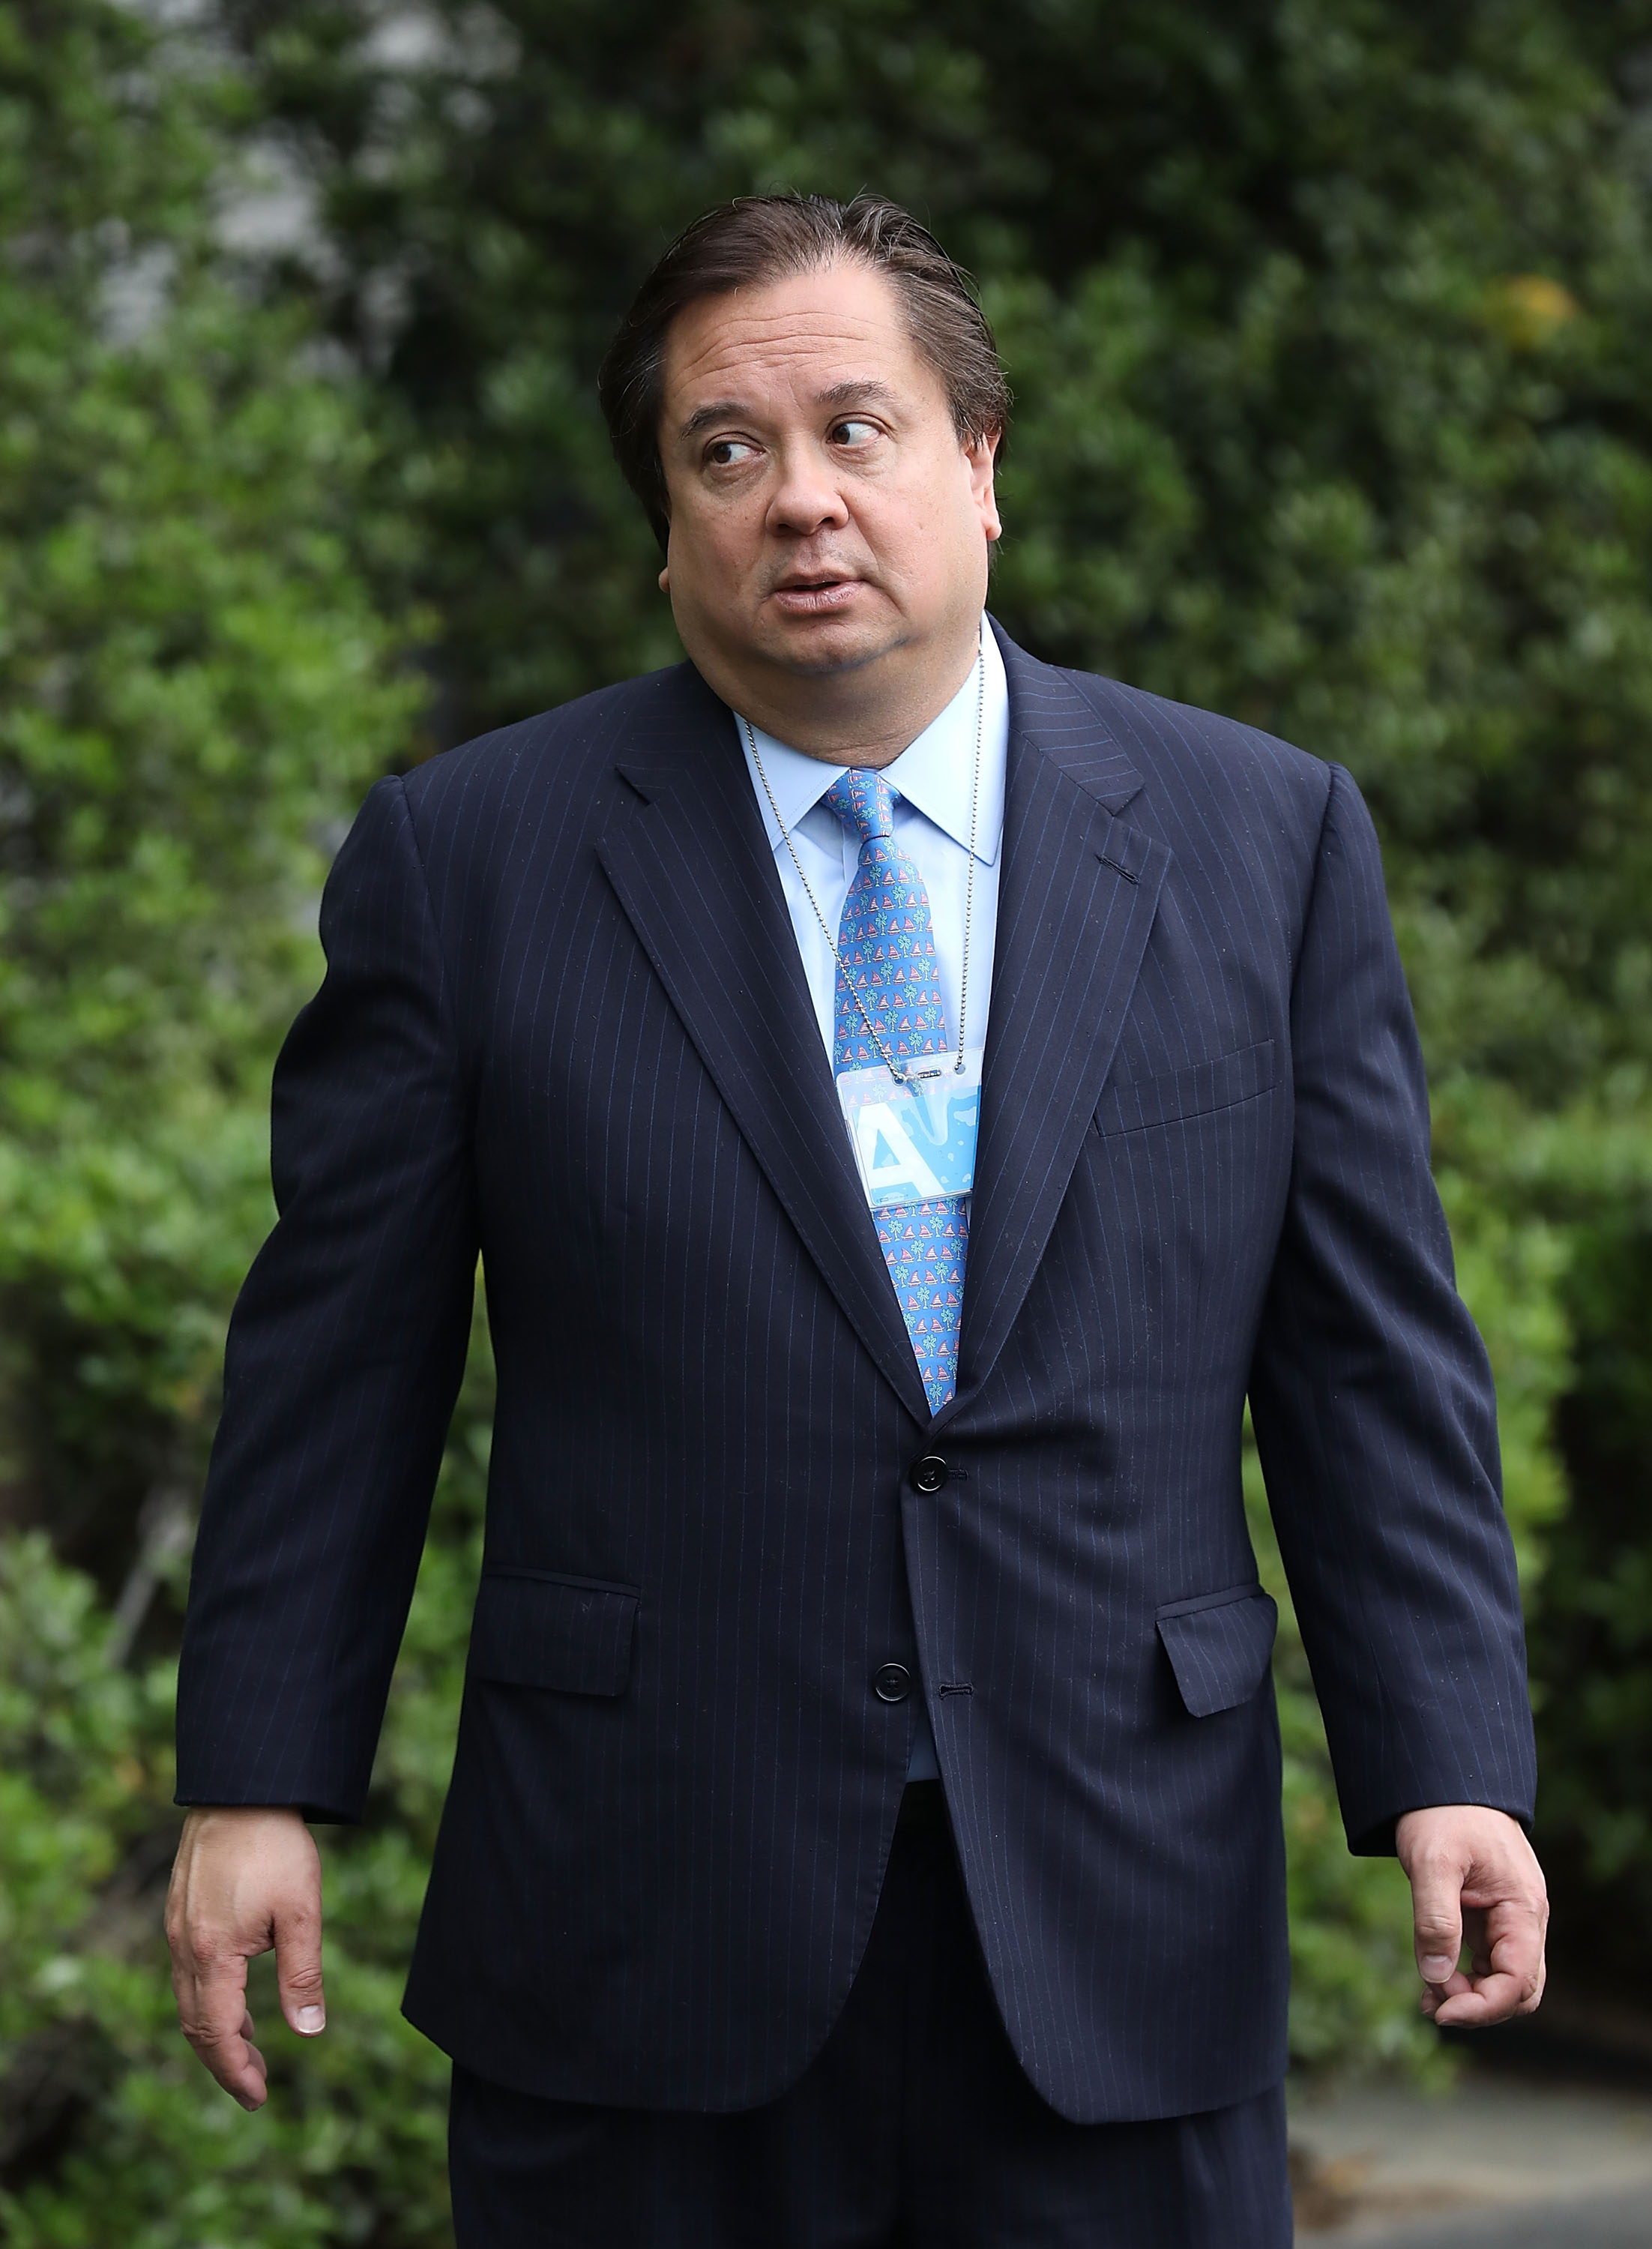 George Conway, husband of White House adviser Kellyanne Conway, at the White House on April 17, 2017.